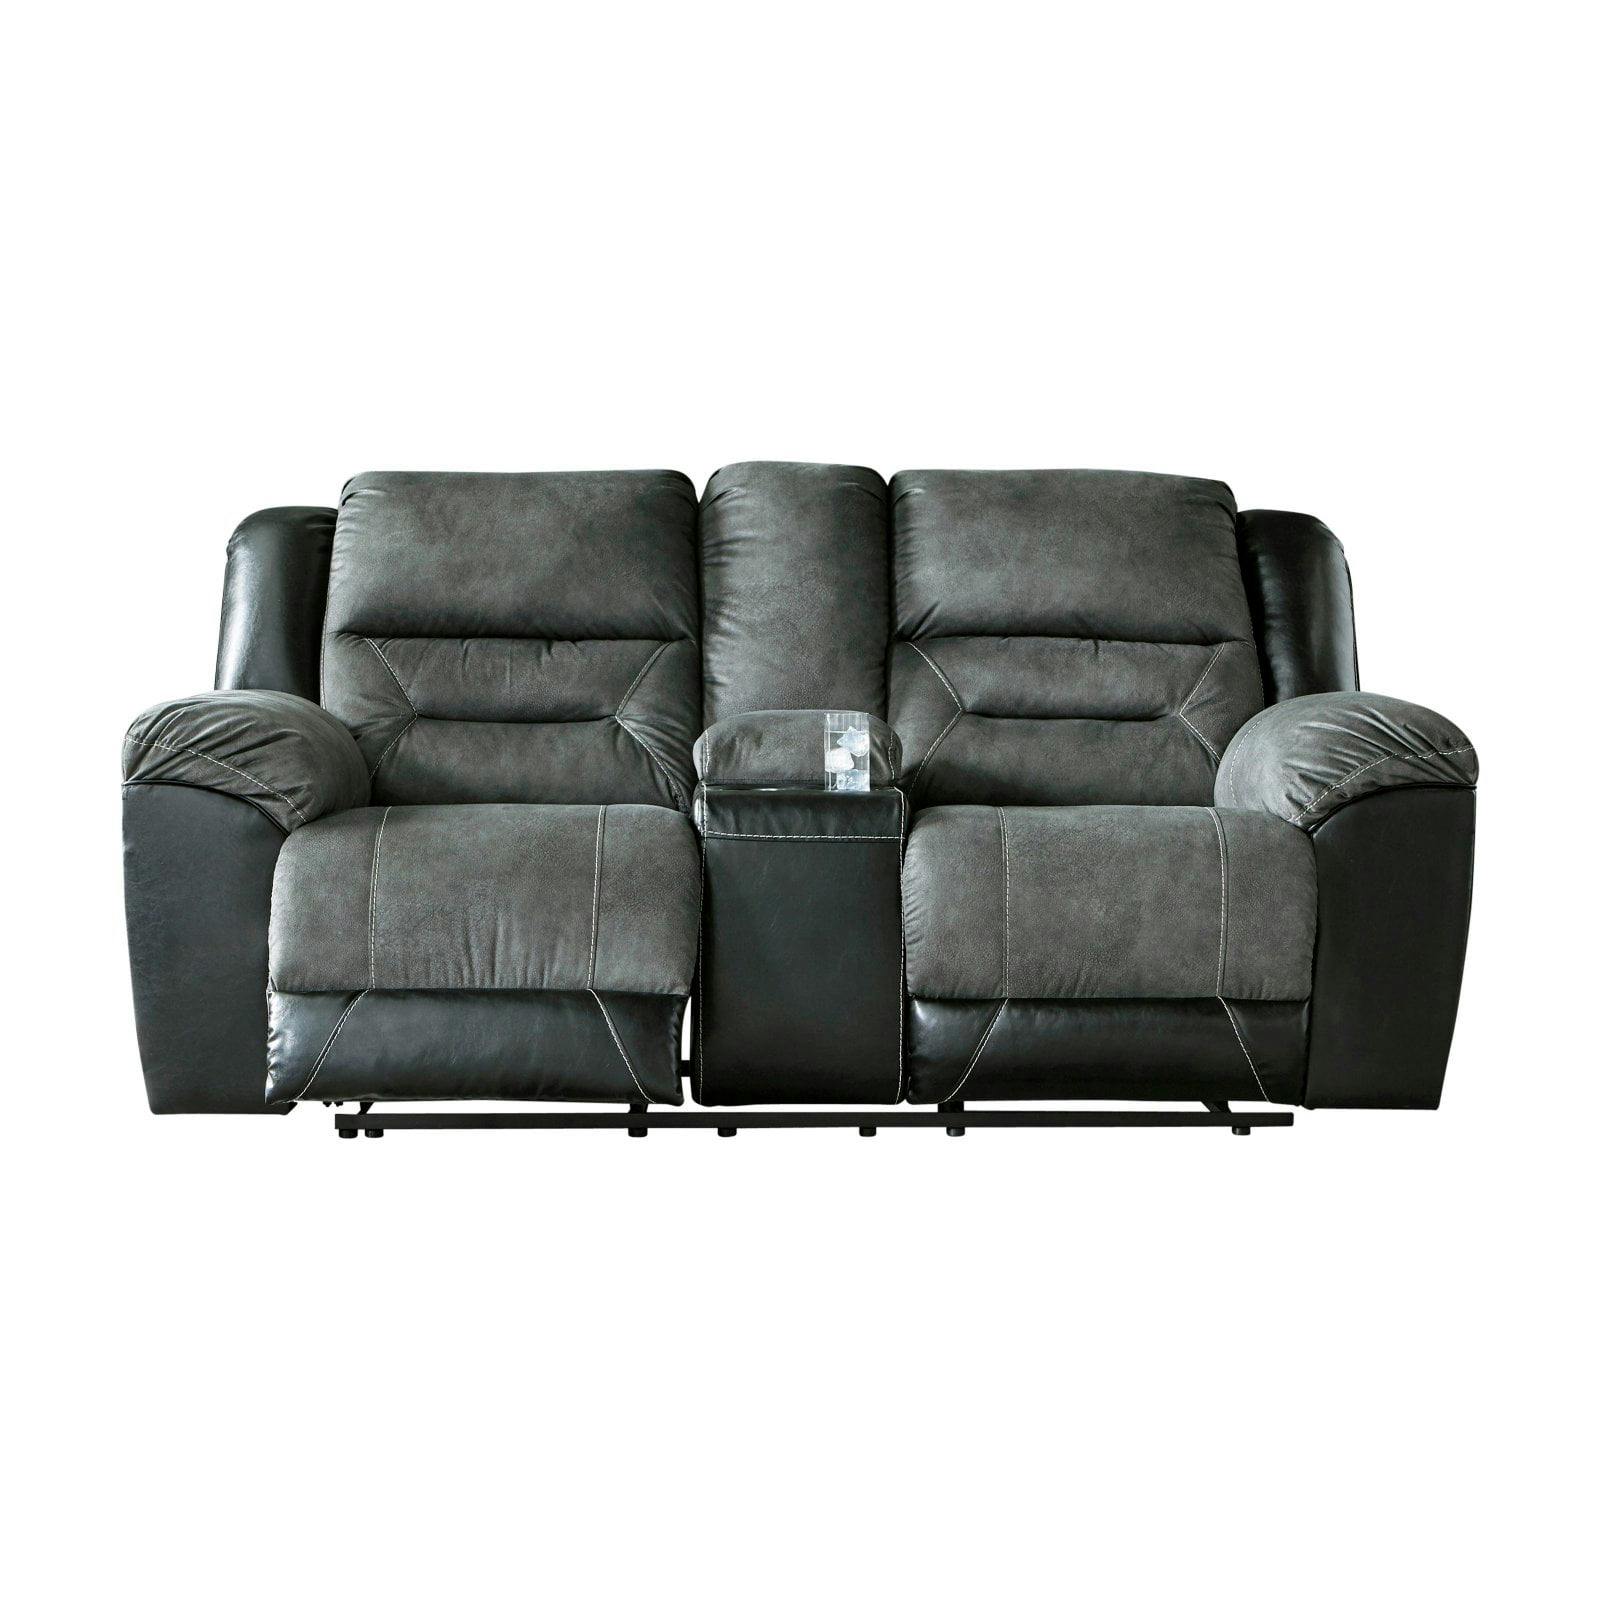 Slate Gray Tufted Reclining Loveseat with Cup Holder in Faux Leather